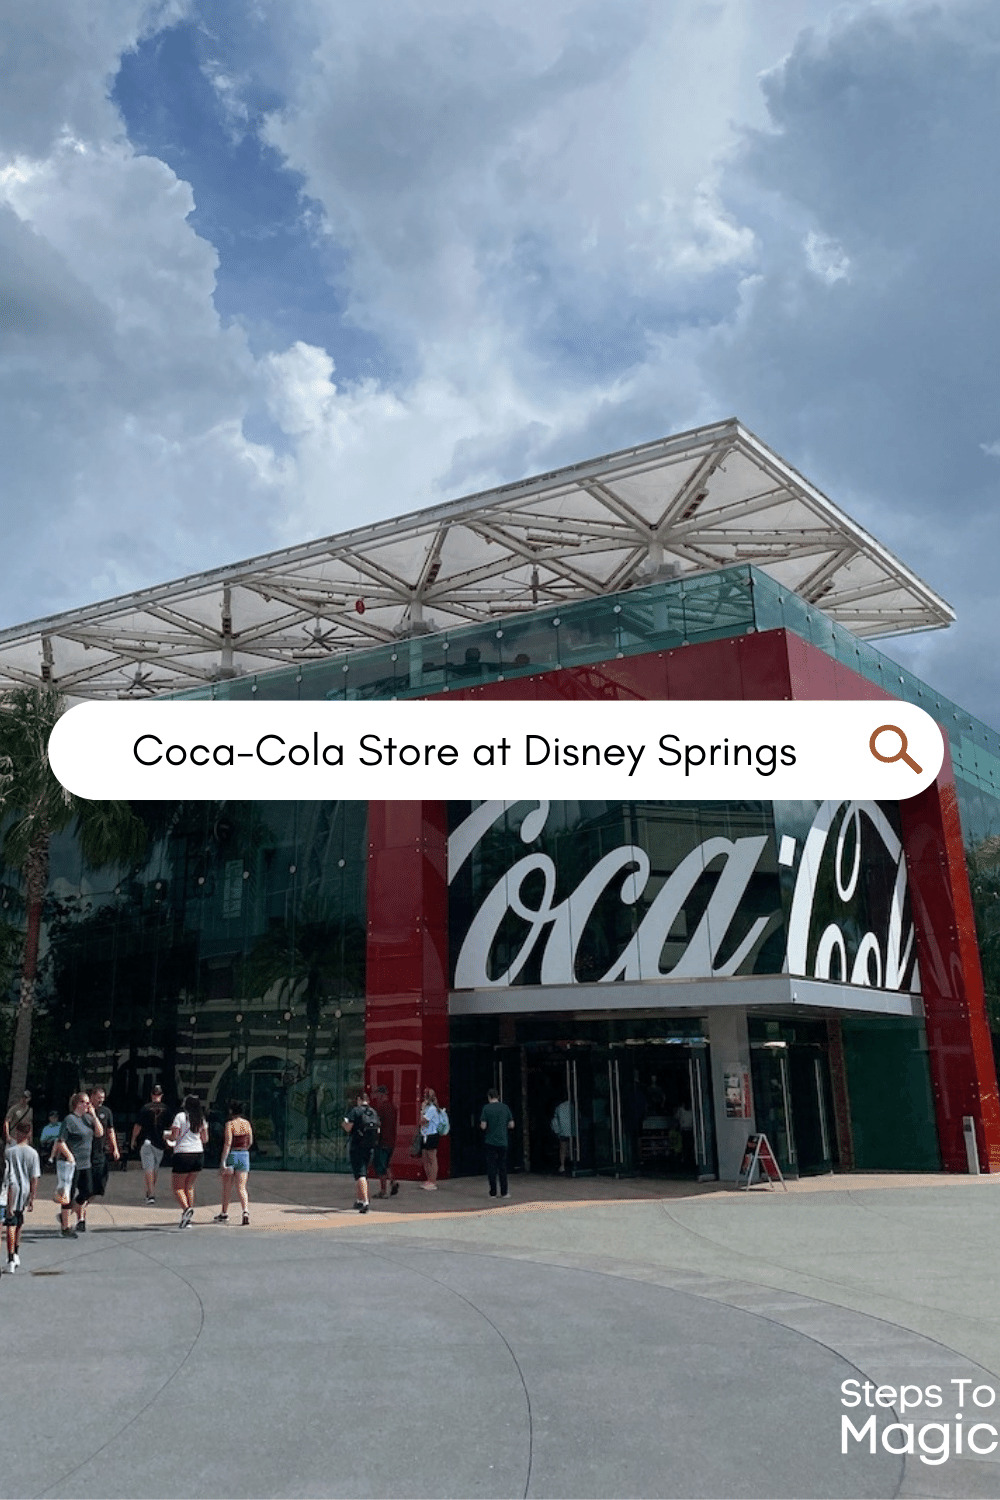 Fun Facts about the Coca-Cola Store at Disney Springs